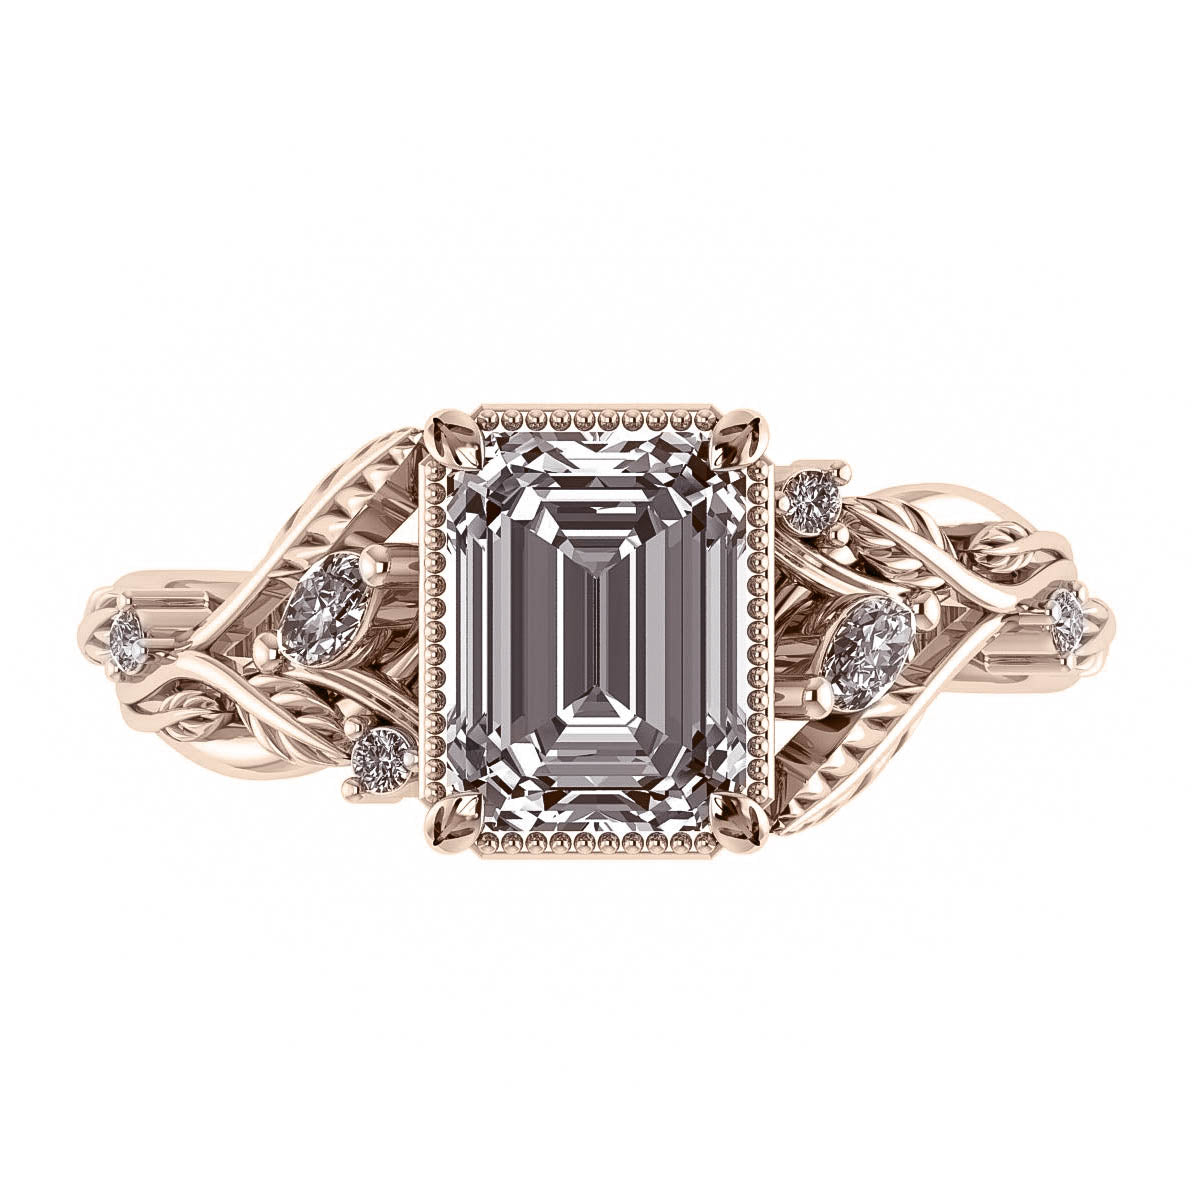 Patricia asymmetric | engagement ring setting with emerald cut gemstone 8x6 mm - Eden Garden Jewelry™